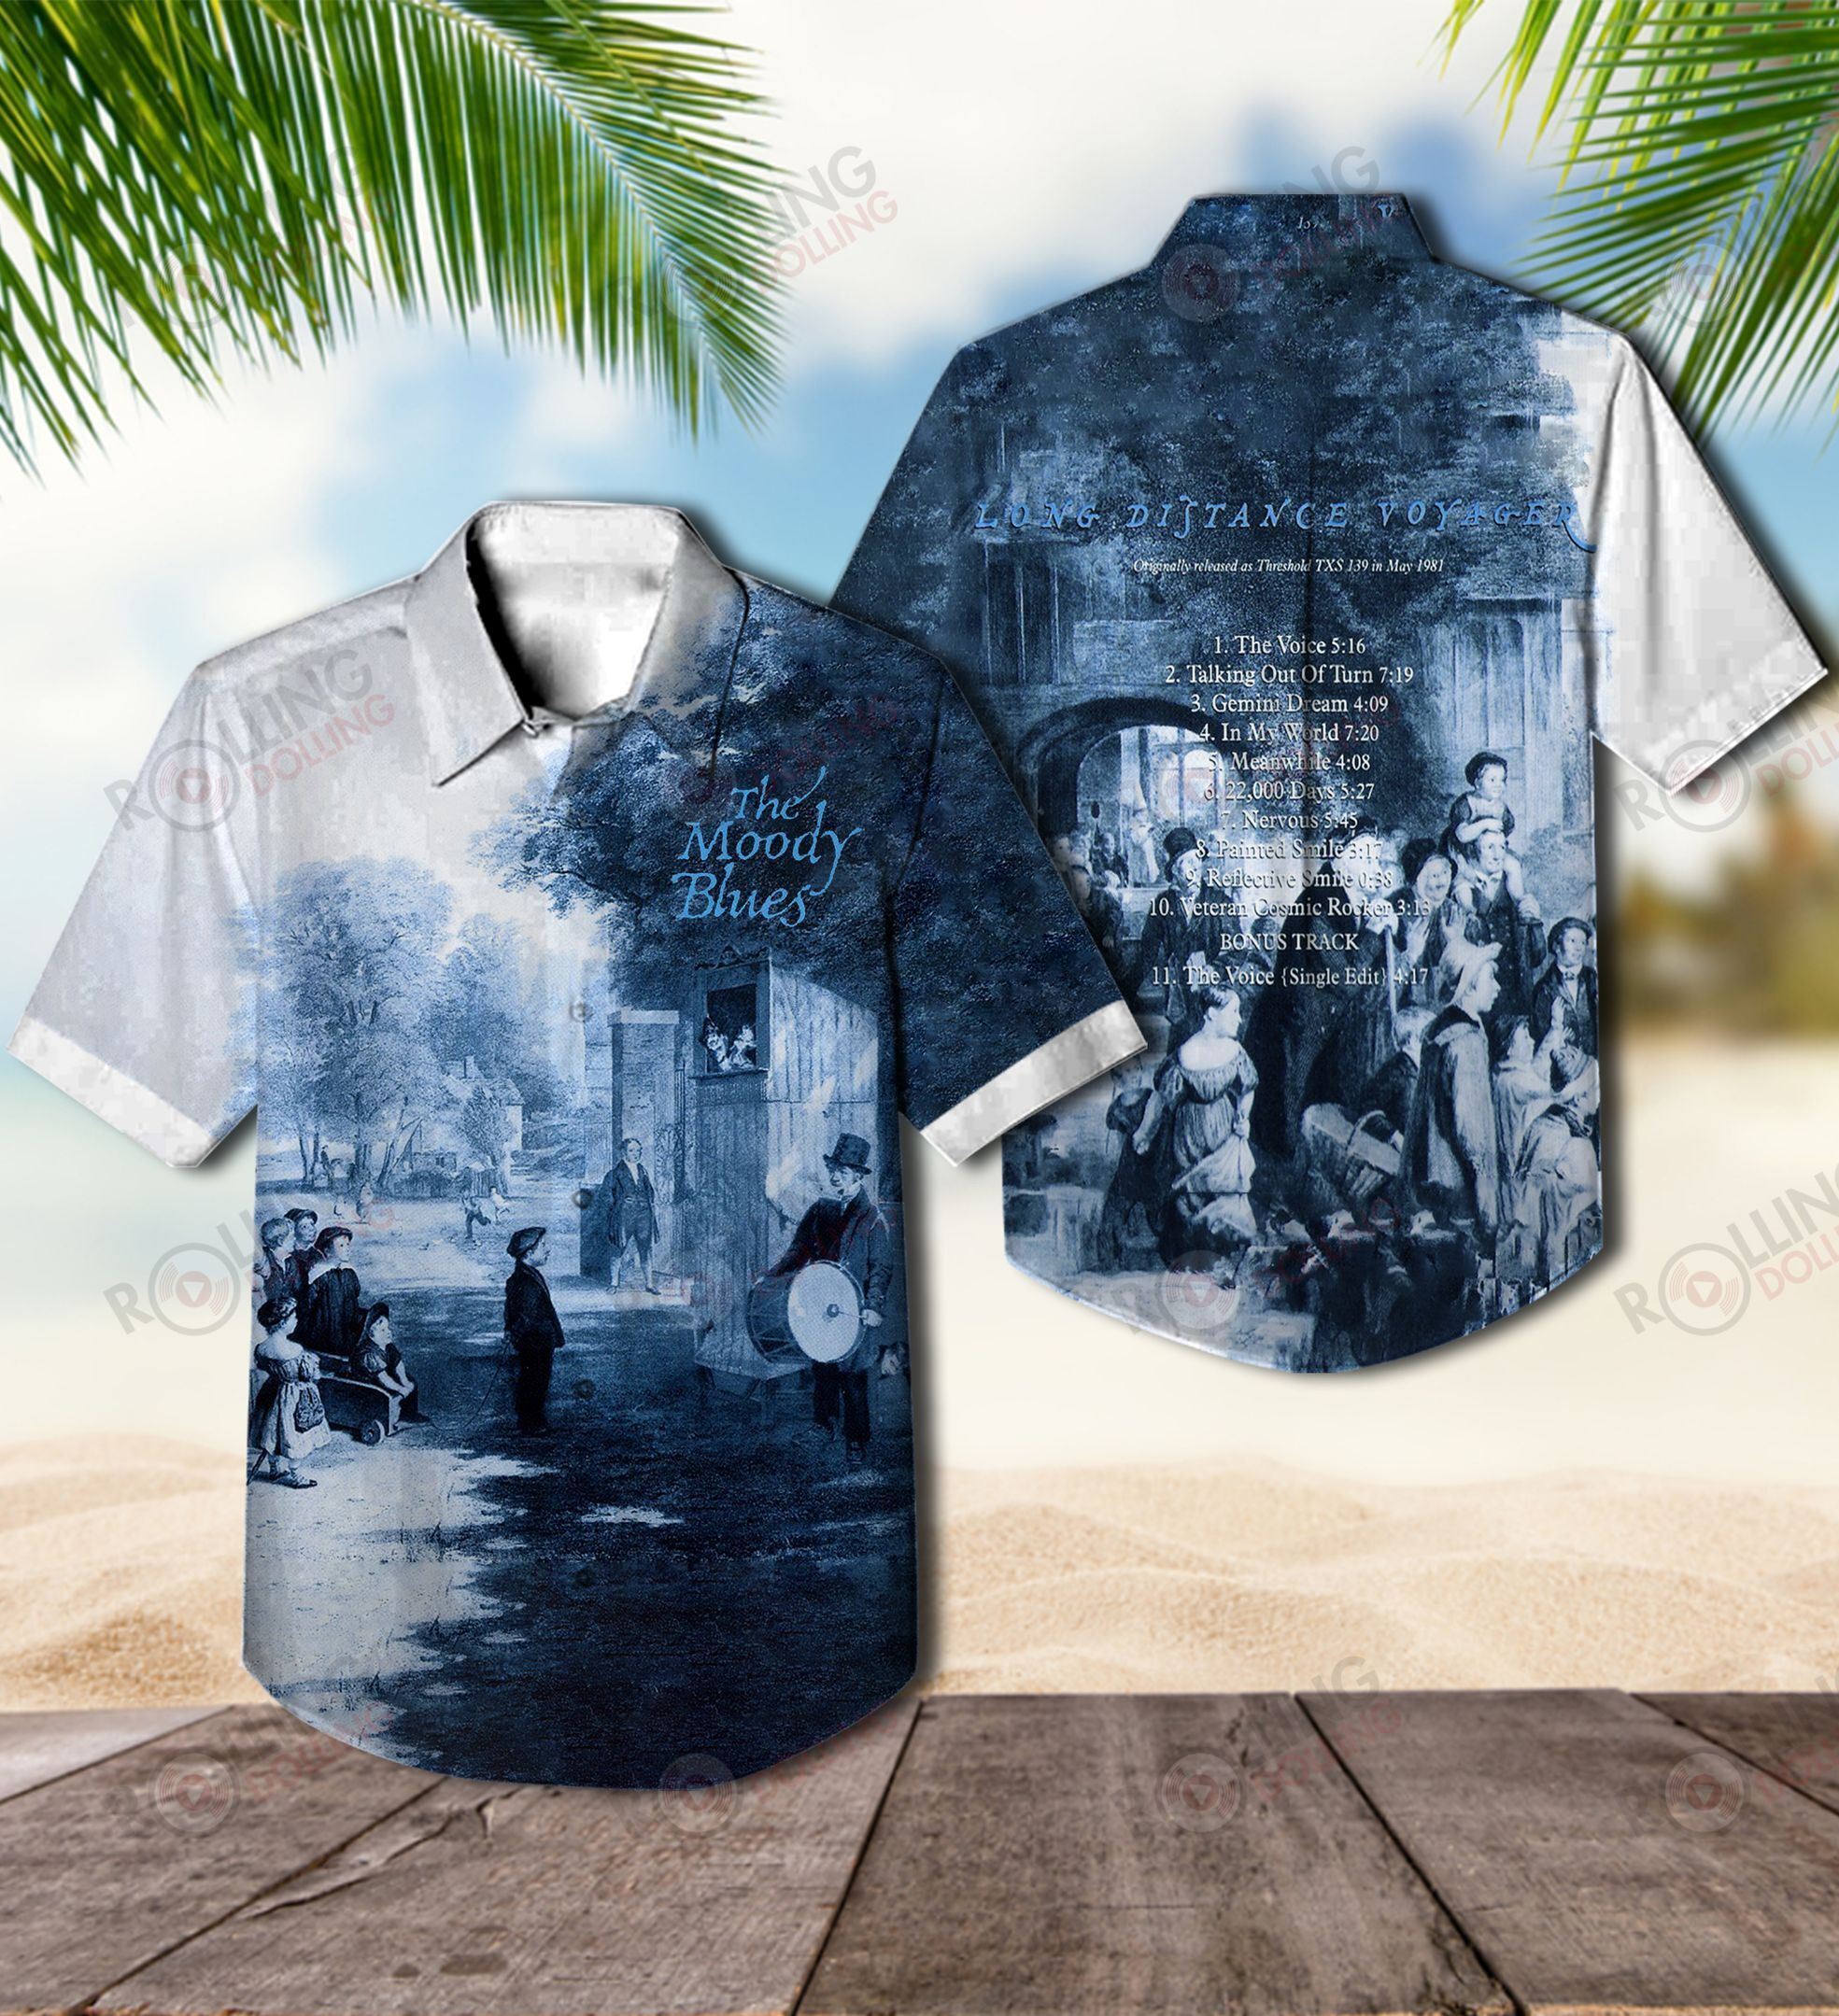 Check out these top 100+ Hawaiian shirt so cool for rock fans 143